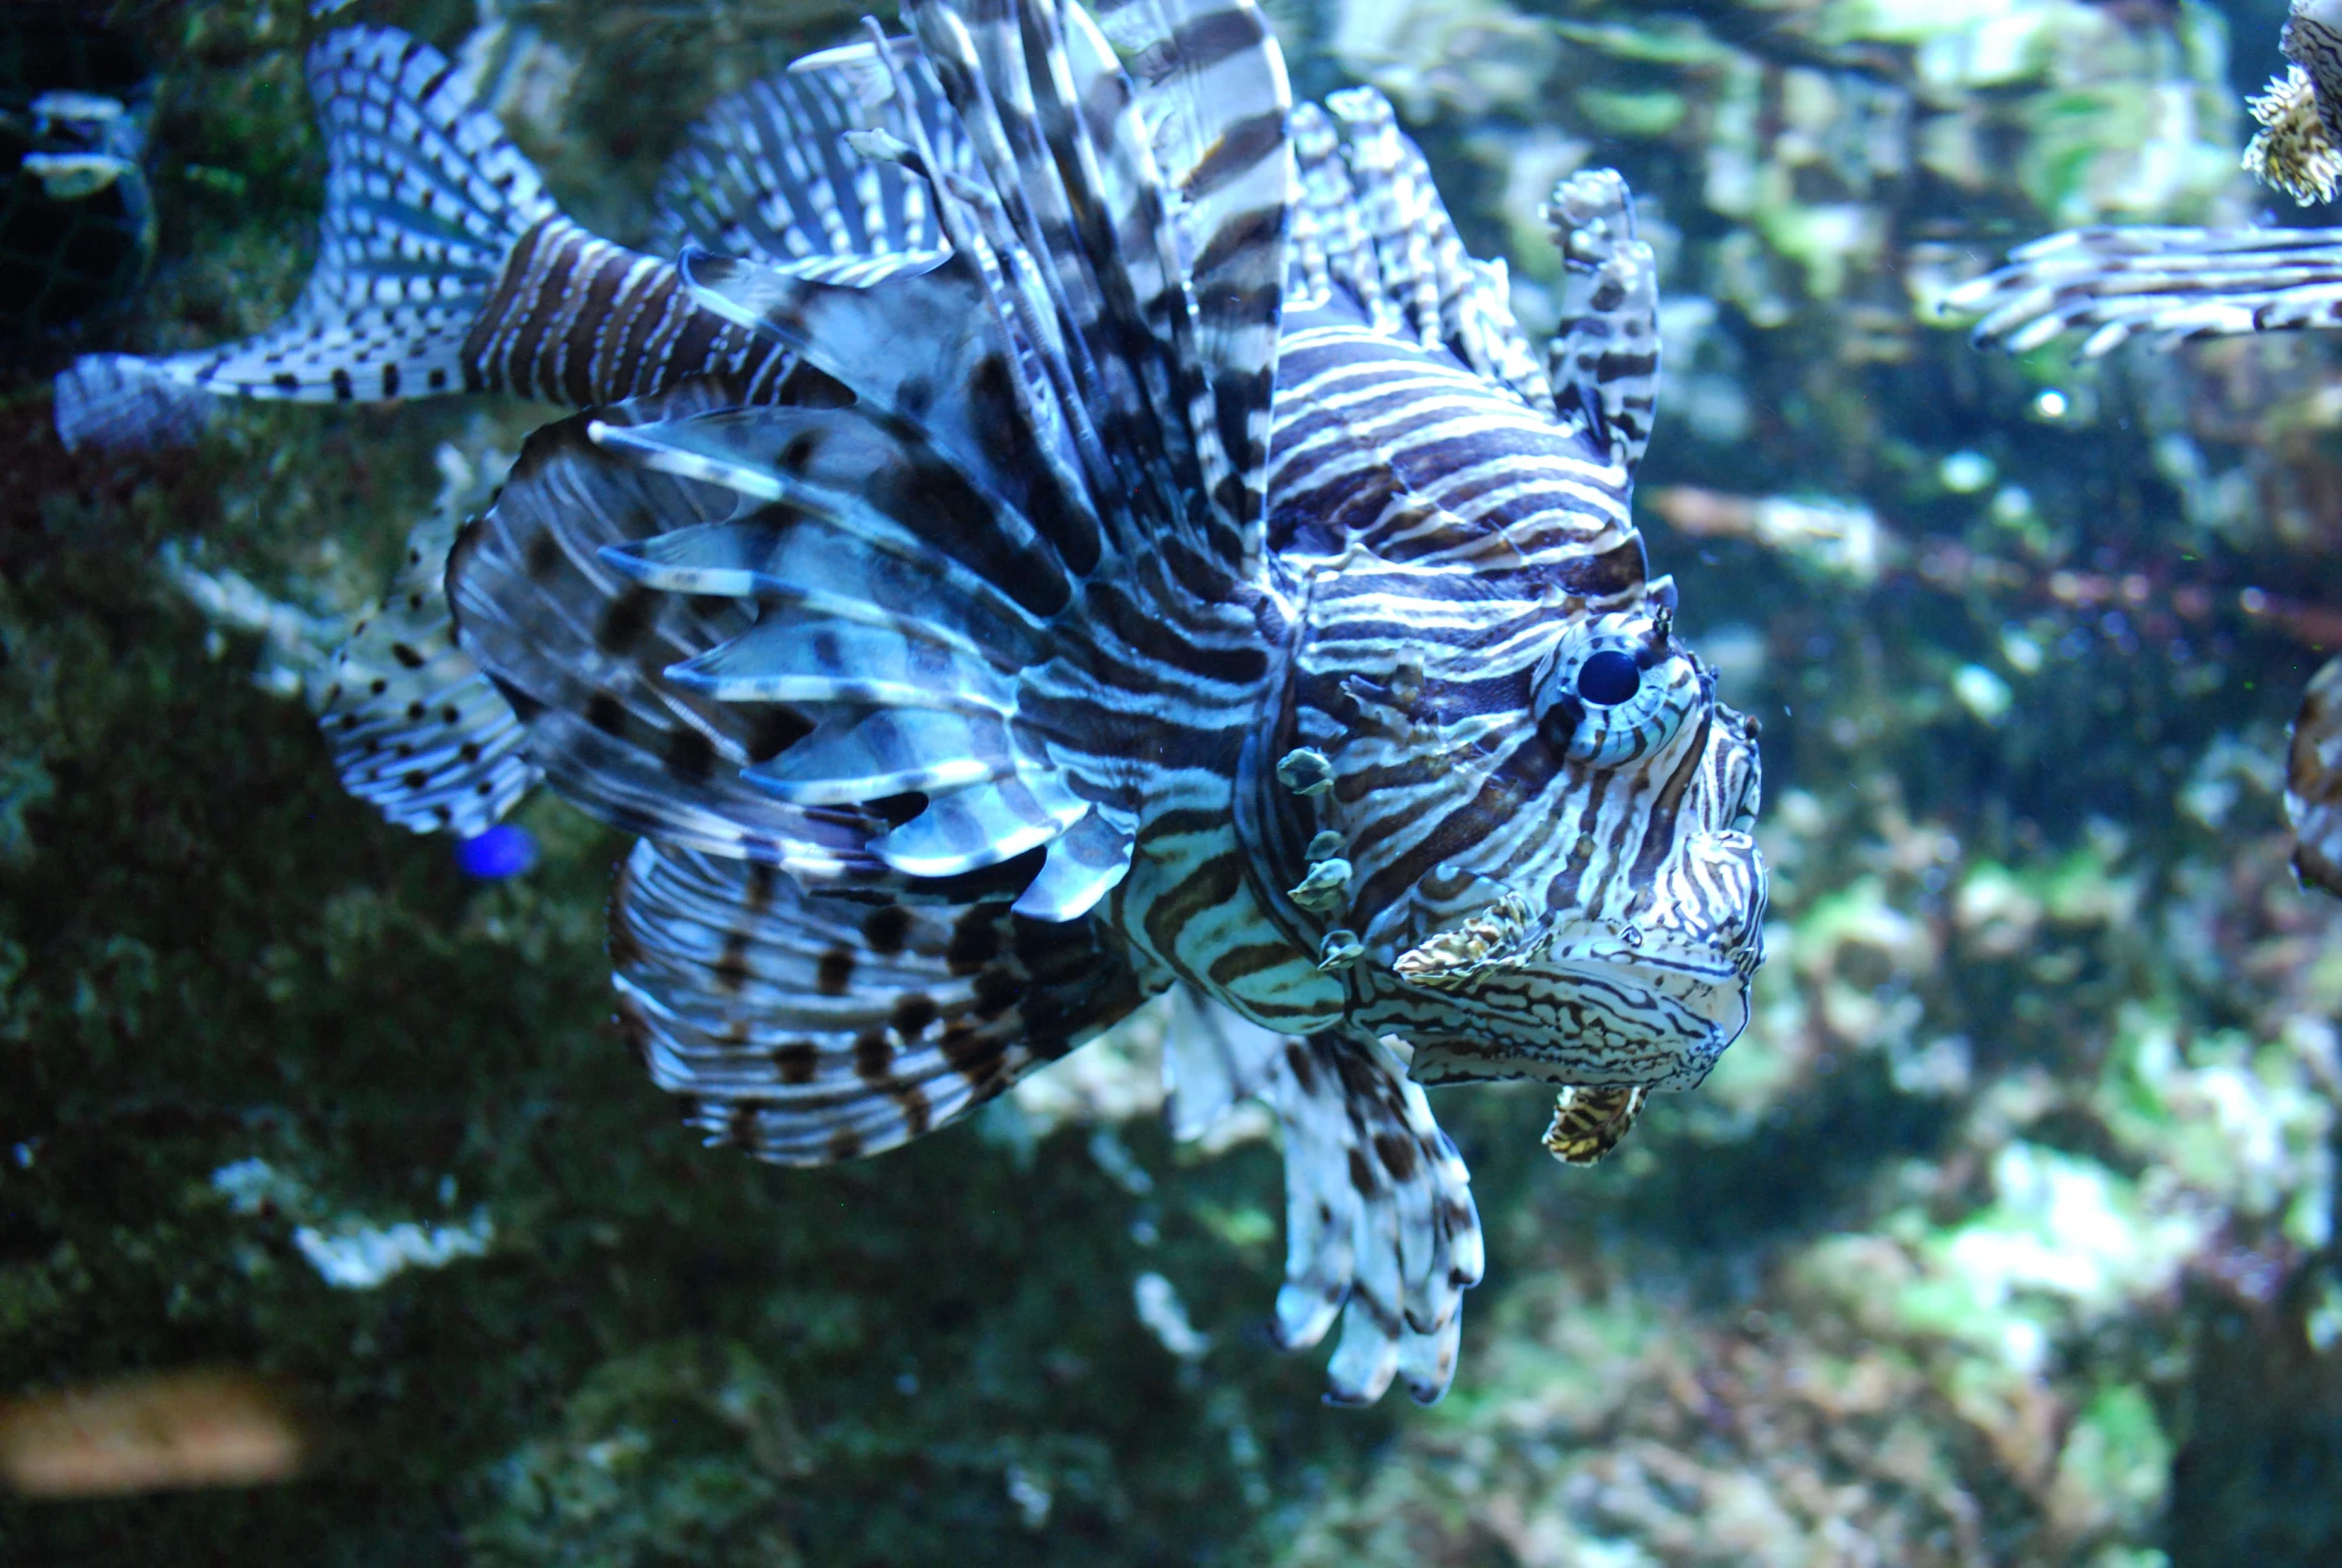 two lion fish are swimming in an aquarium